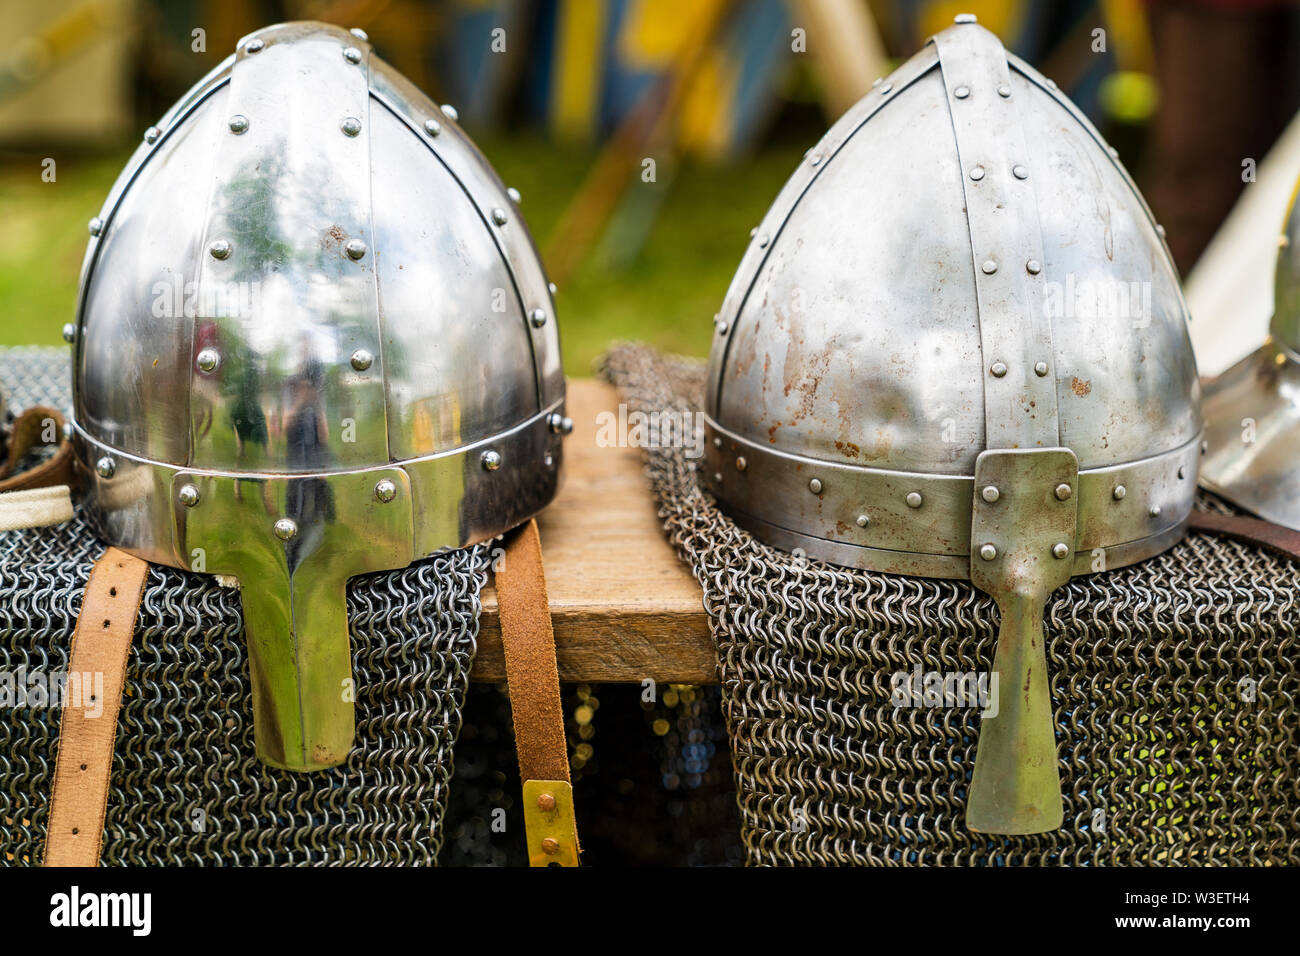 Two variations of Norman Spangenhelm helmets and some chain mail, on display at living history event. Helmets resting on chain mail draped over table. Stock Photo